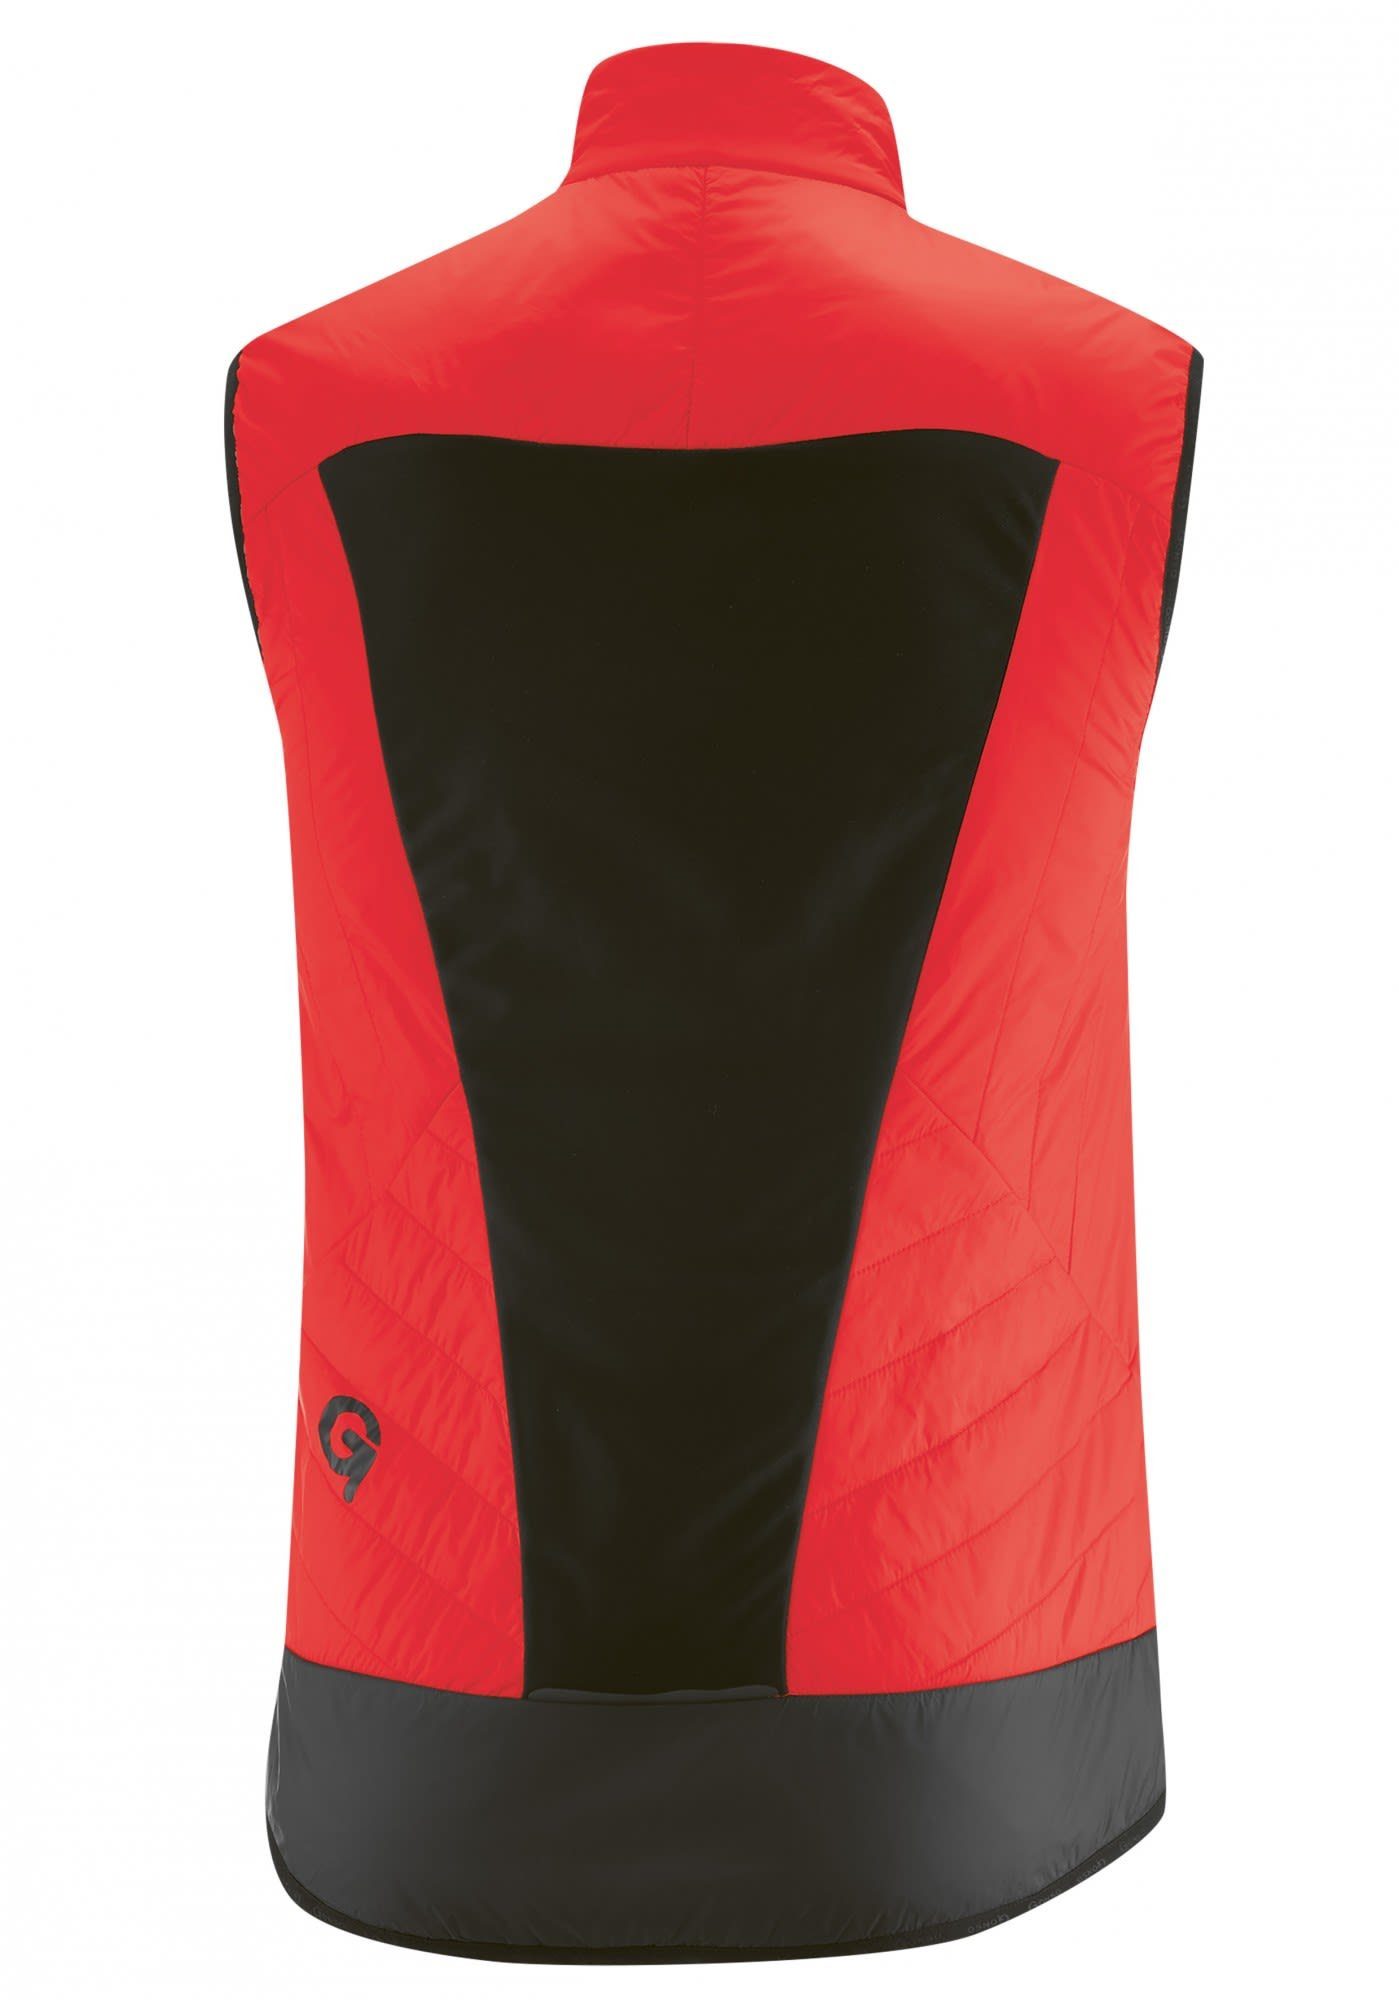 Funktionsweste Gonso Herren Gonso Risk Red M Ruivo High Softshellweste